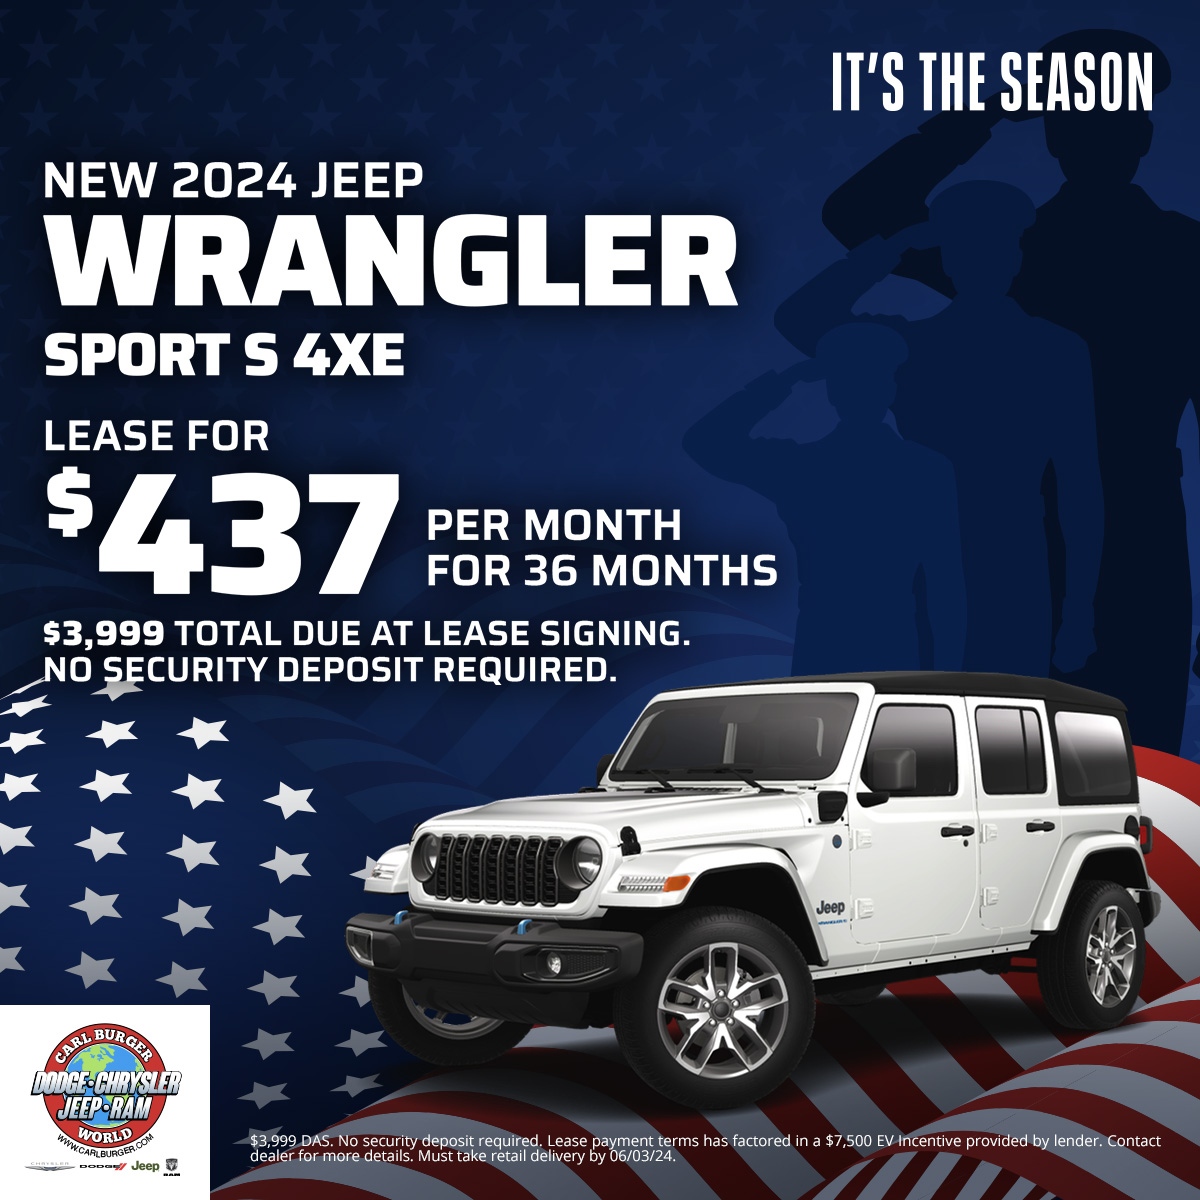 Get electrified this season with the 2024 #Jeep #Wrangler4xe! ⚡️ Explore exclusive offers this month and embrace the thrill of eco-friendly driving 🚘 Experience the ultimate adventure when you visit us this weekend! #JeepLife #TGIF #JeepWrangler